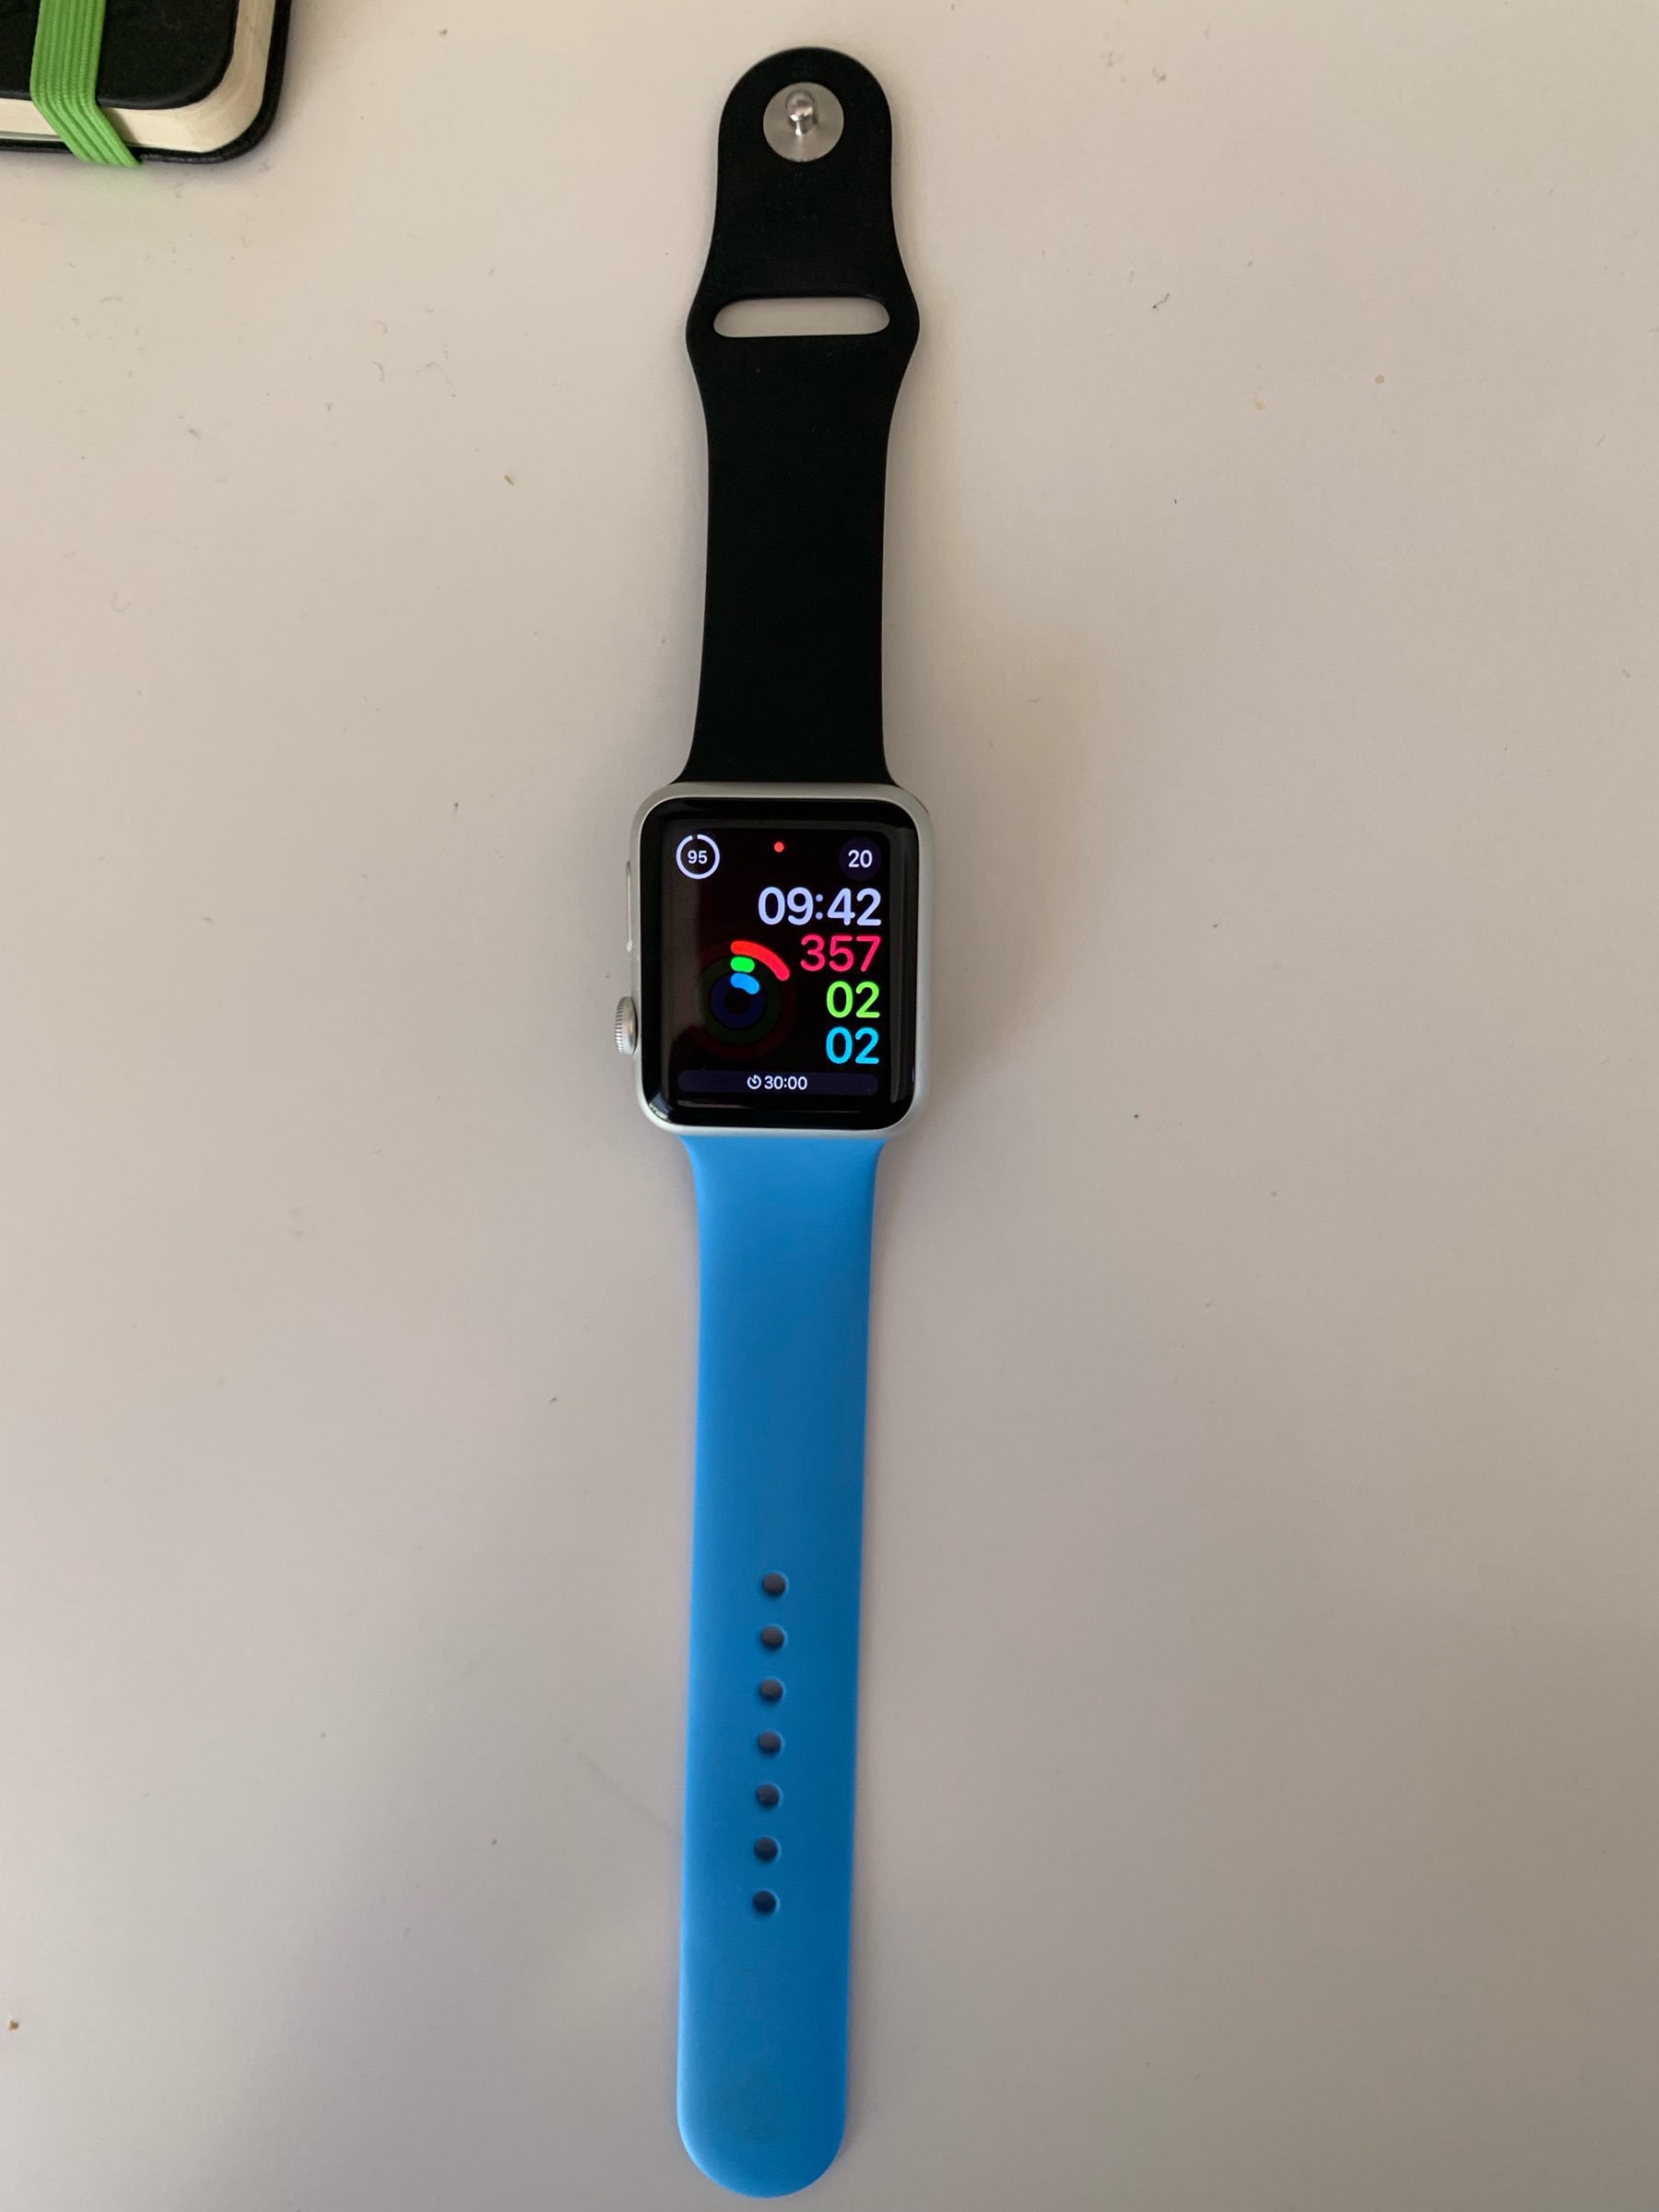 My series 0 apple watch with one blue and one black strap. 